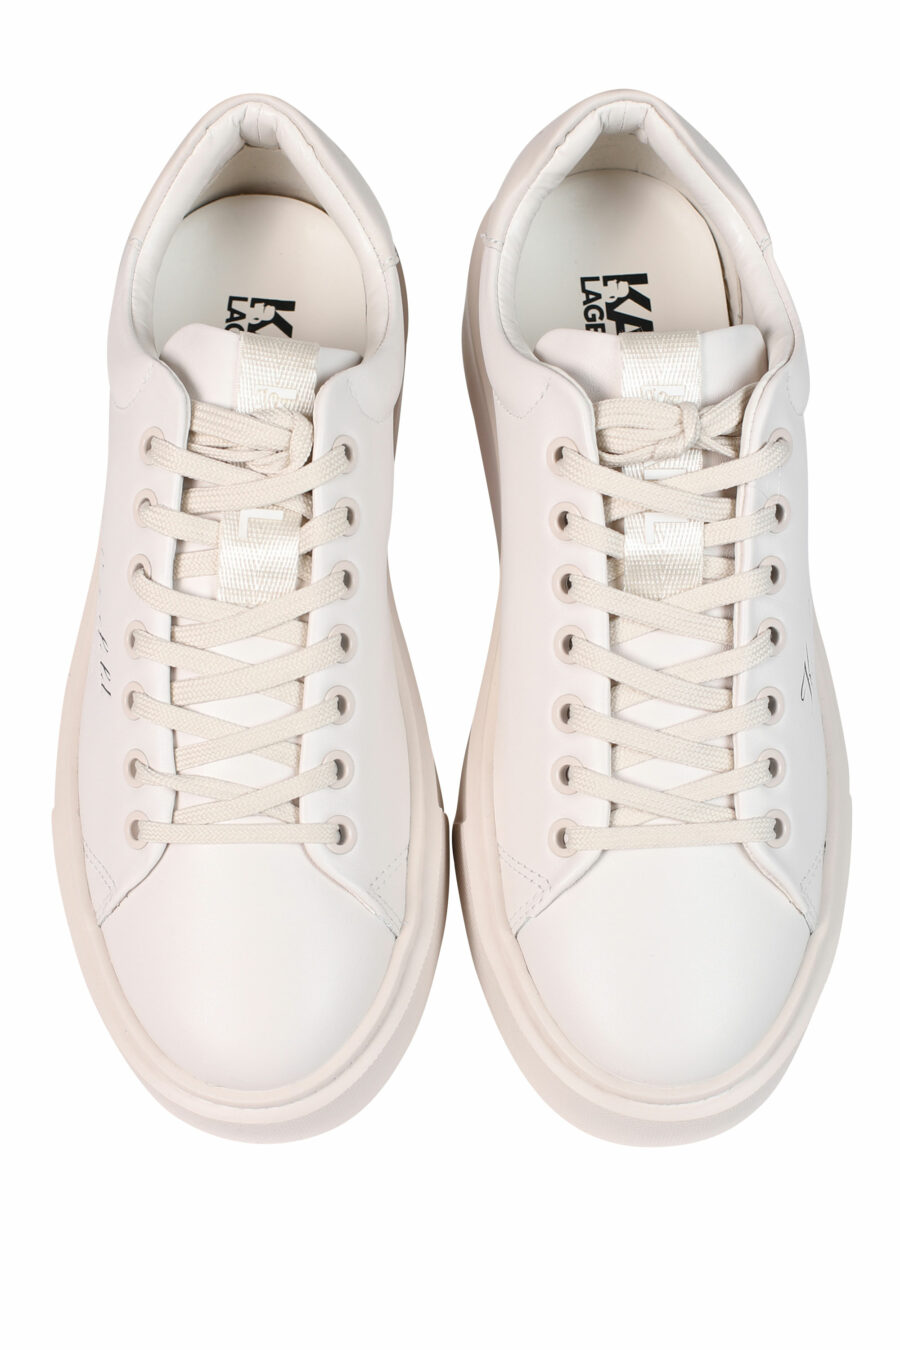 White trainers with calligraphic "hotel" logo - 5059529251054 5